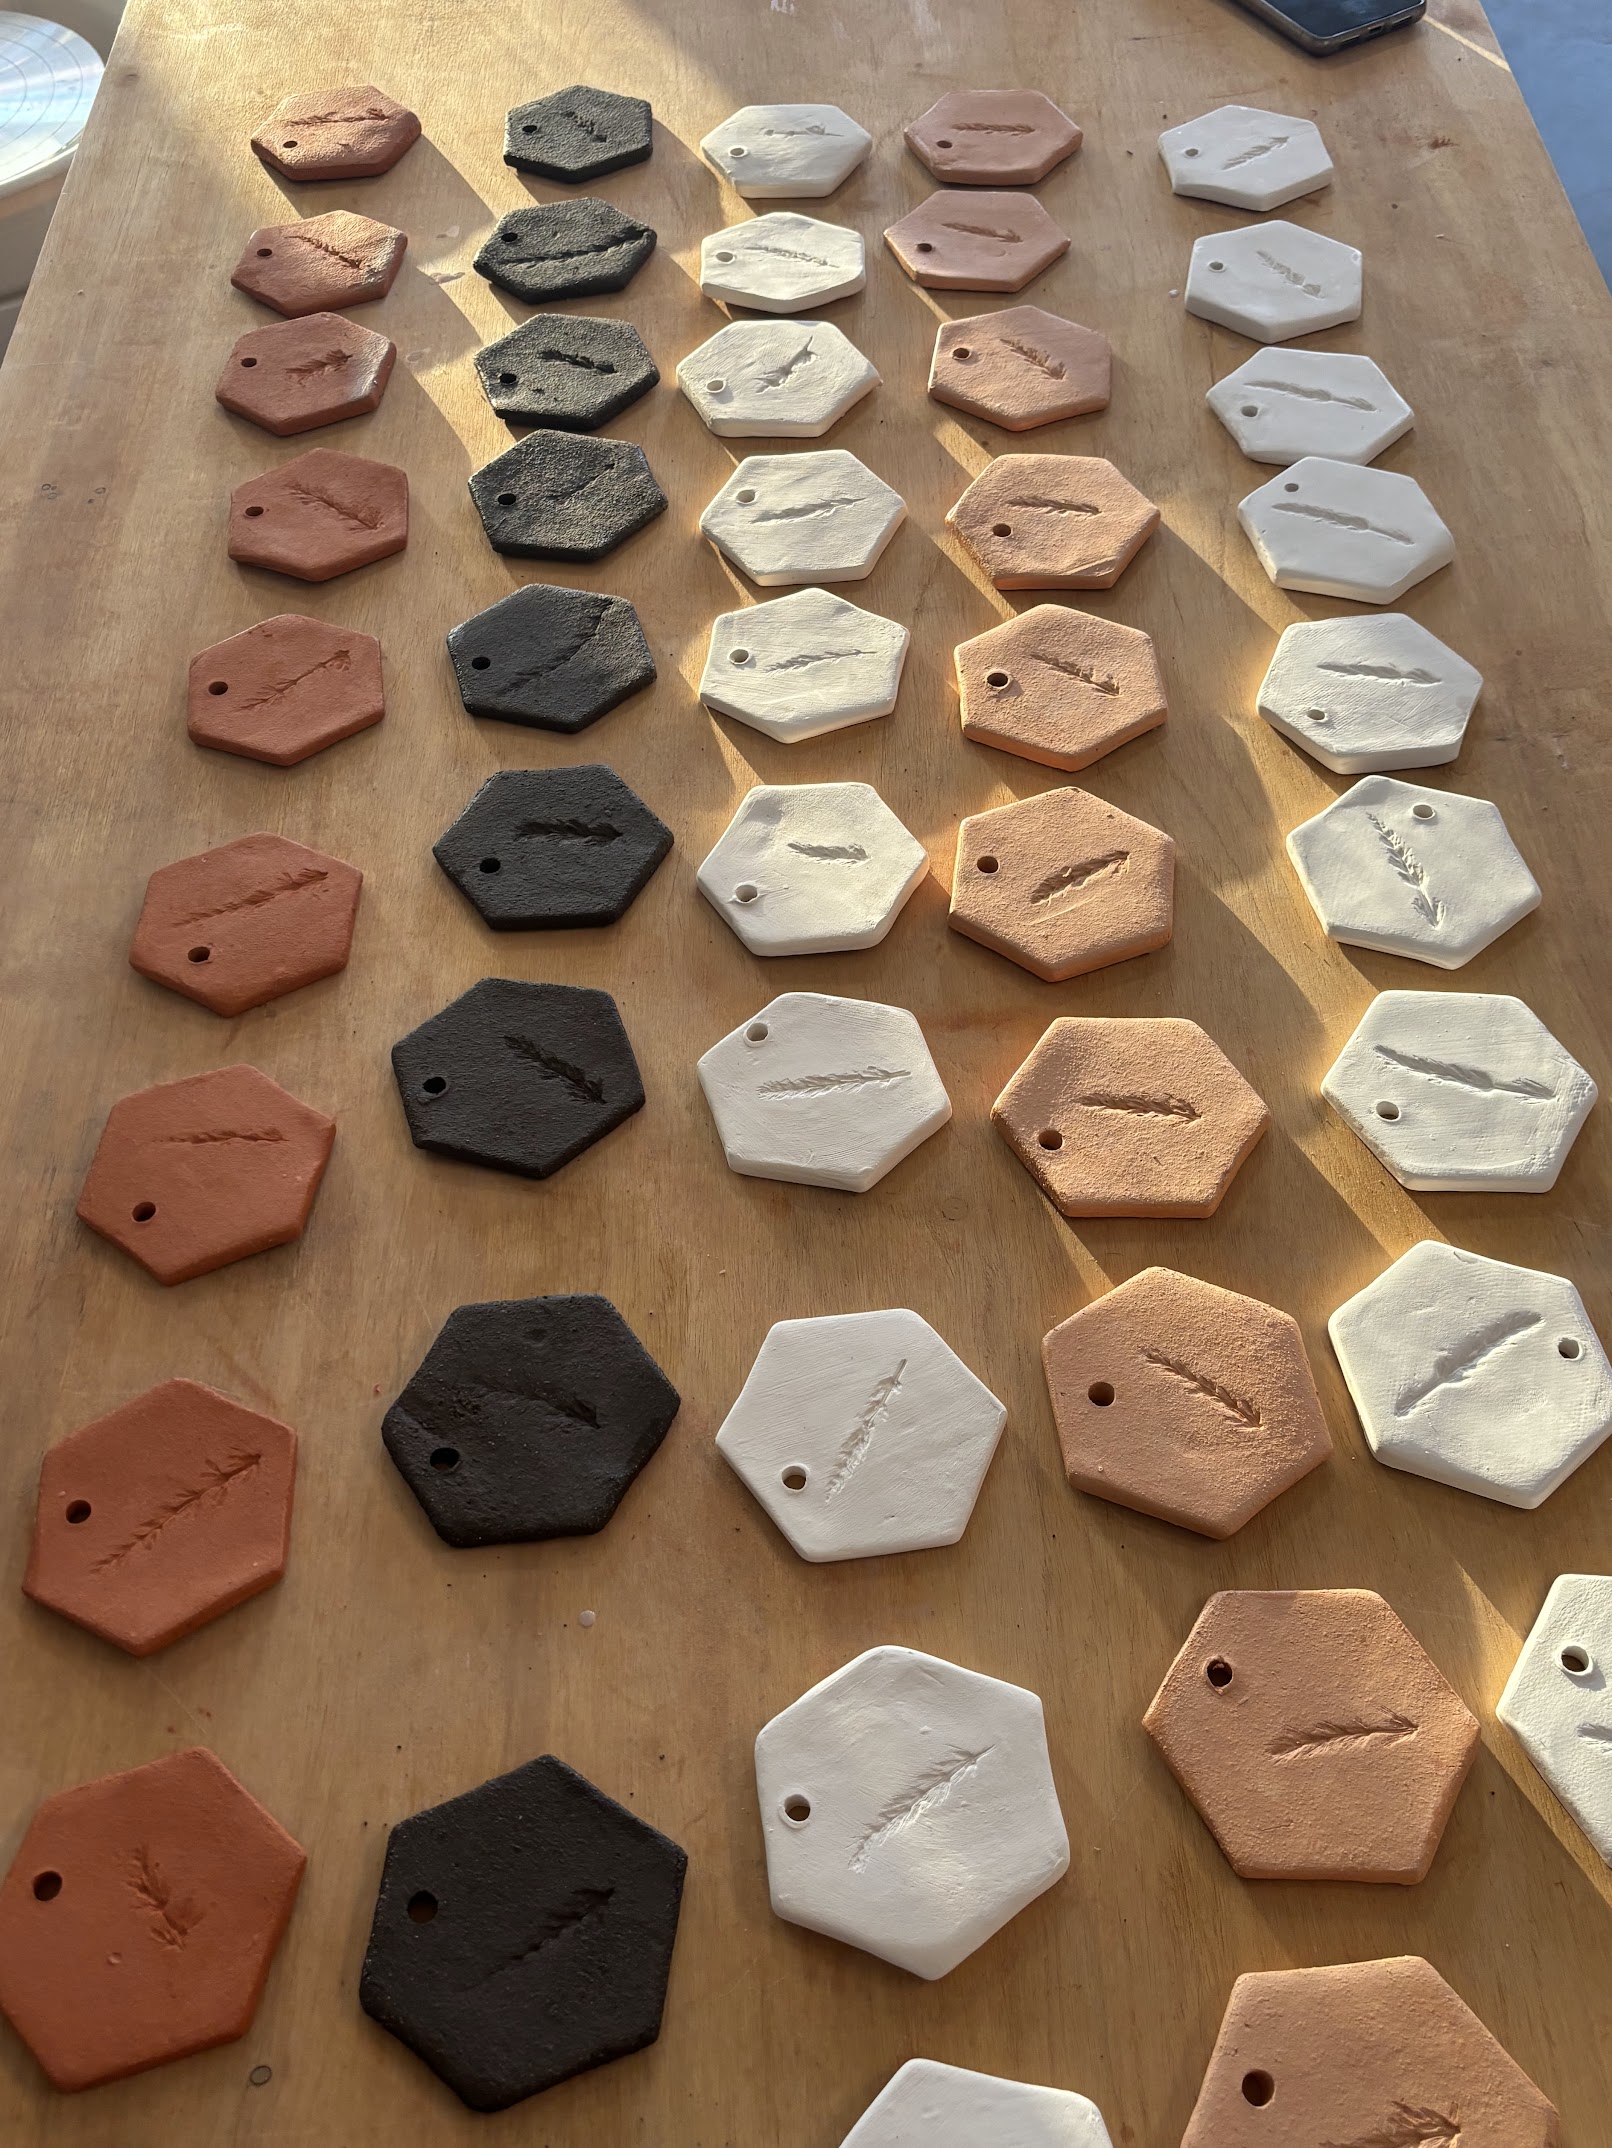 Photo of hexagonal test titles showing different clay bodies